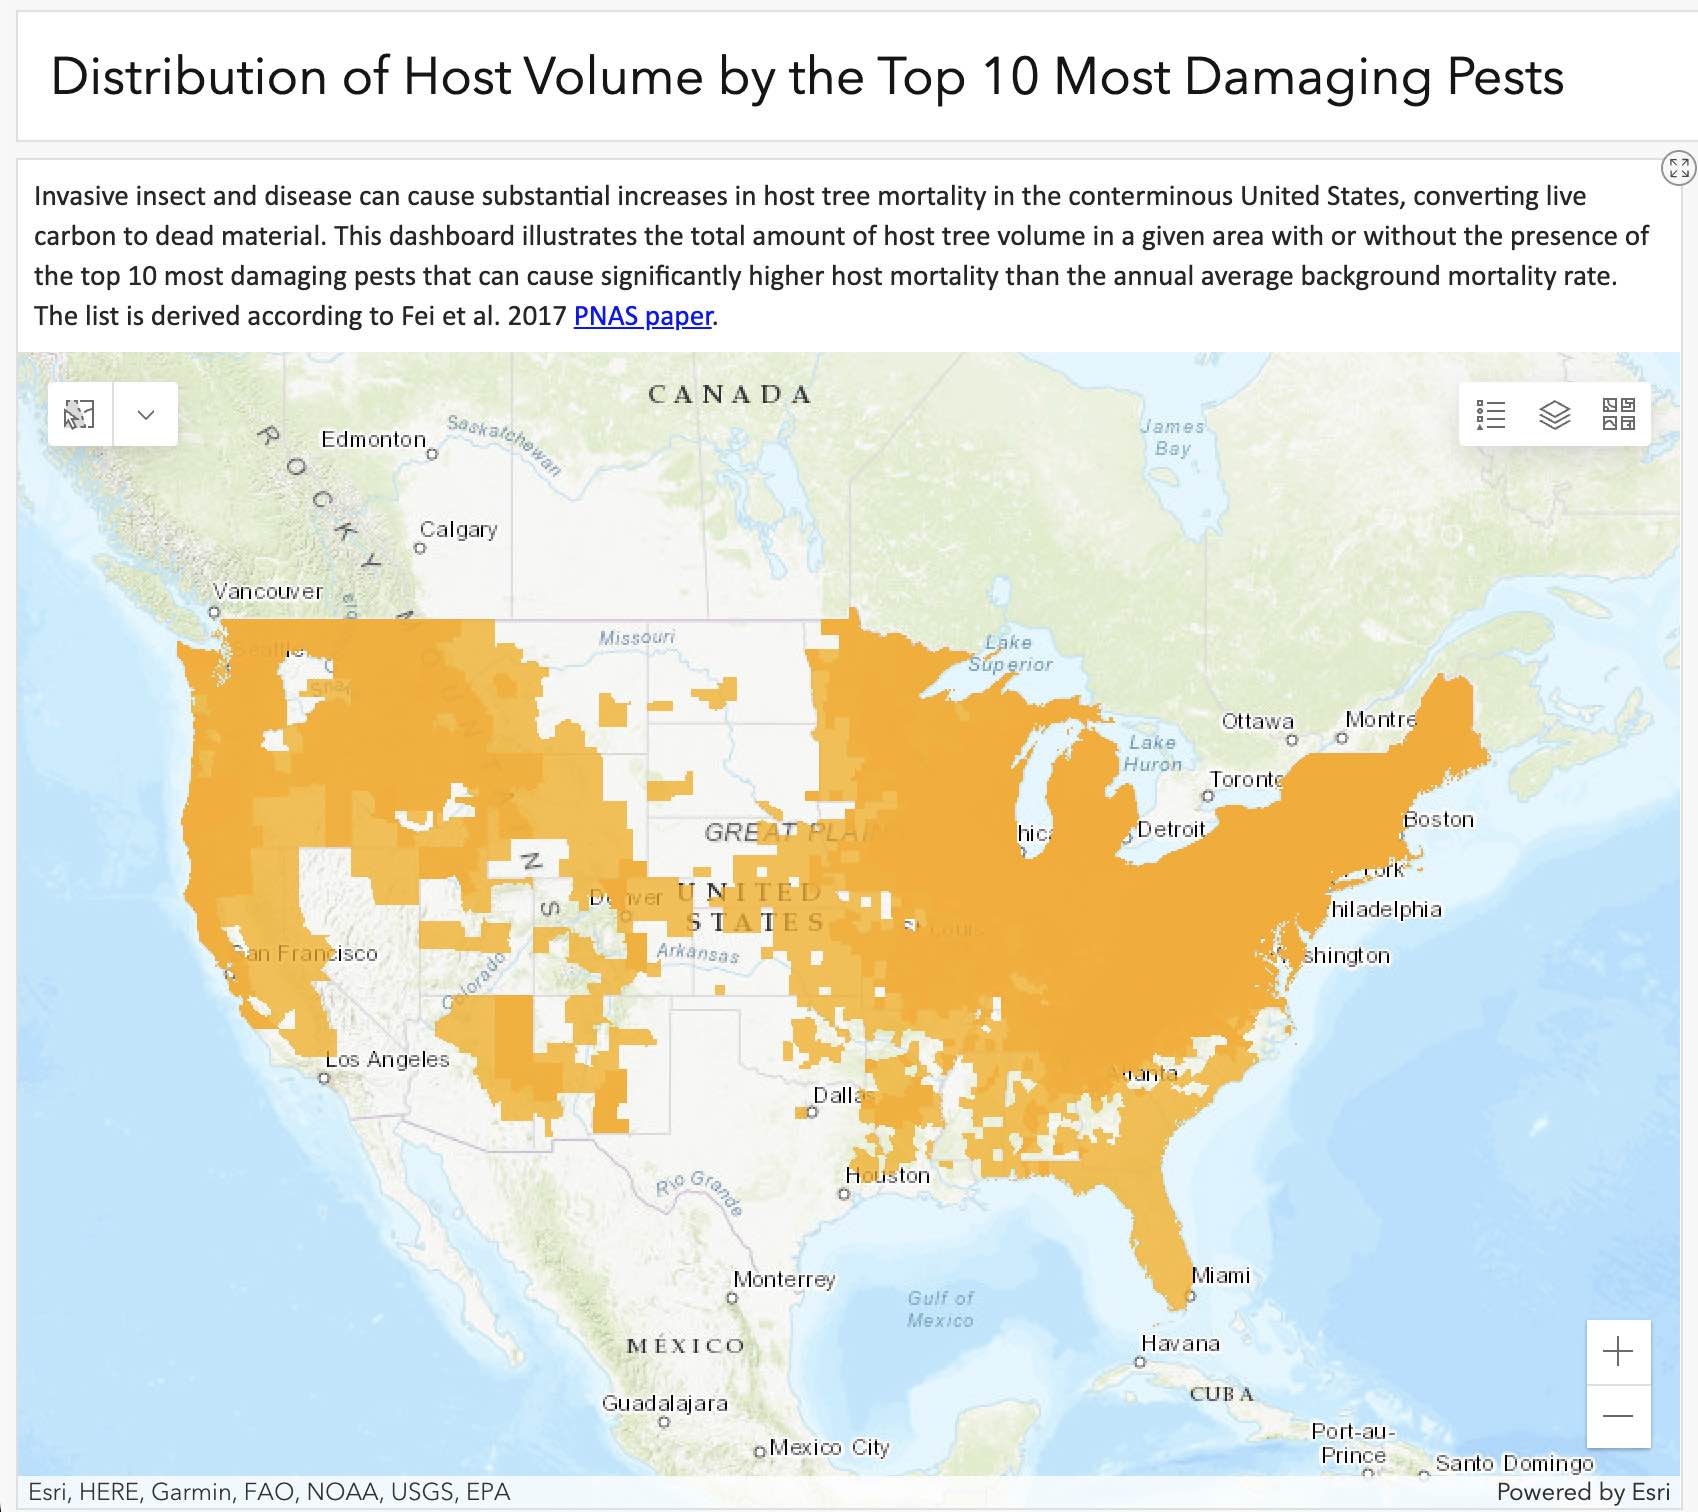 Map of the United States showing the impact of the top 10 most damaging pests across the U.S.